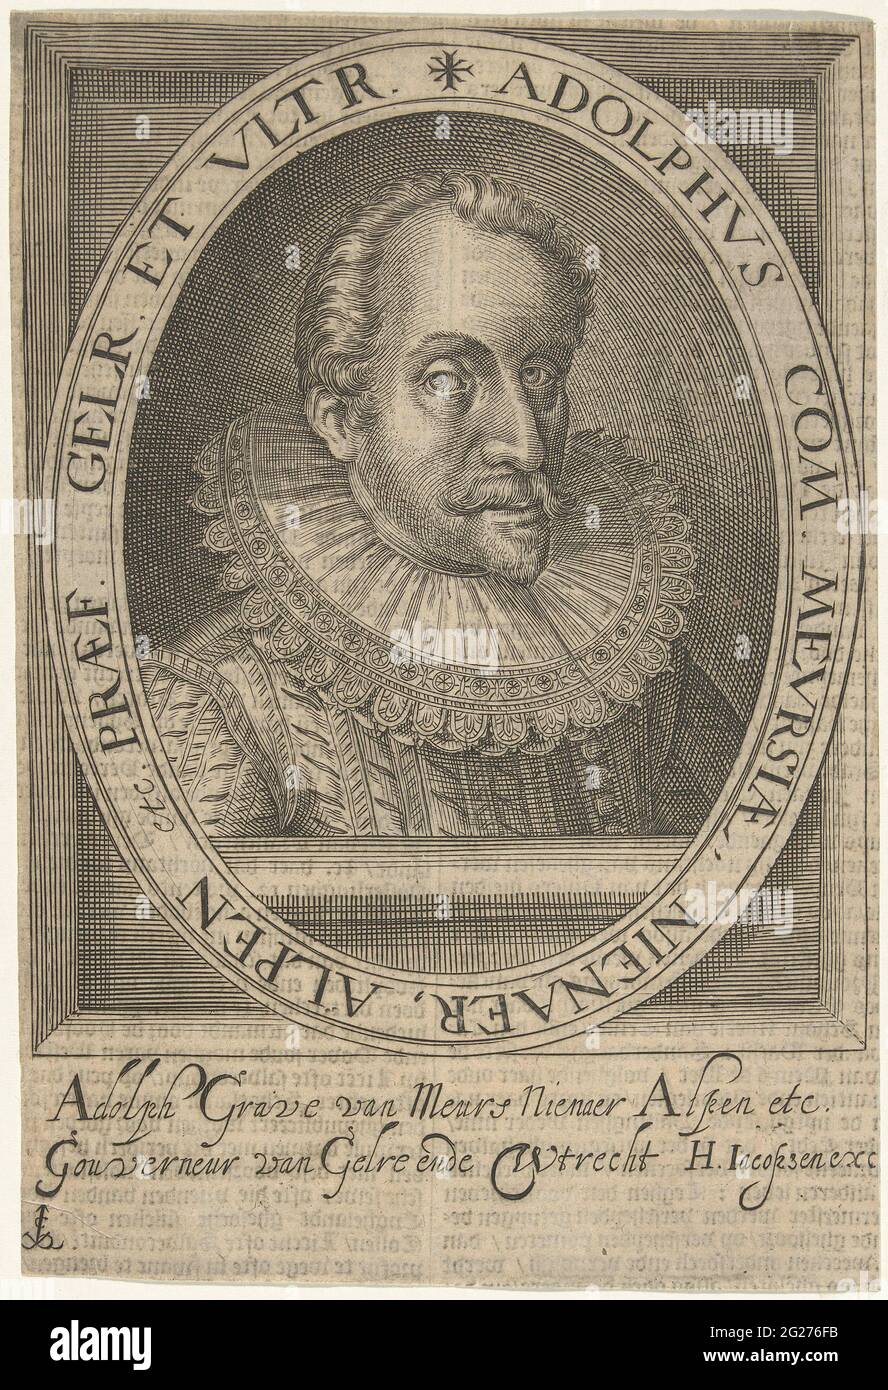 Portrait of Adolf from Nieuwenaar. Portrait of Adolf van Nieuwenaar, Count of Nieuwenaar and Meurs. His name and titles under the portrait. Stock Photo